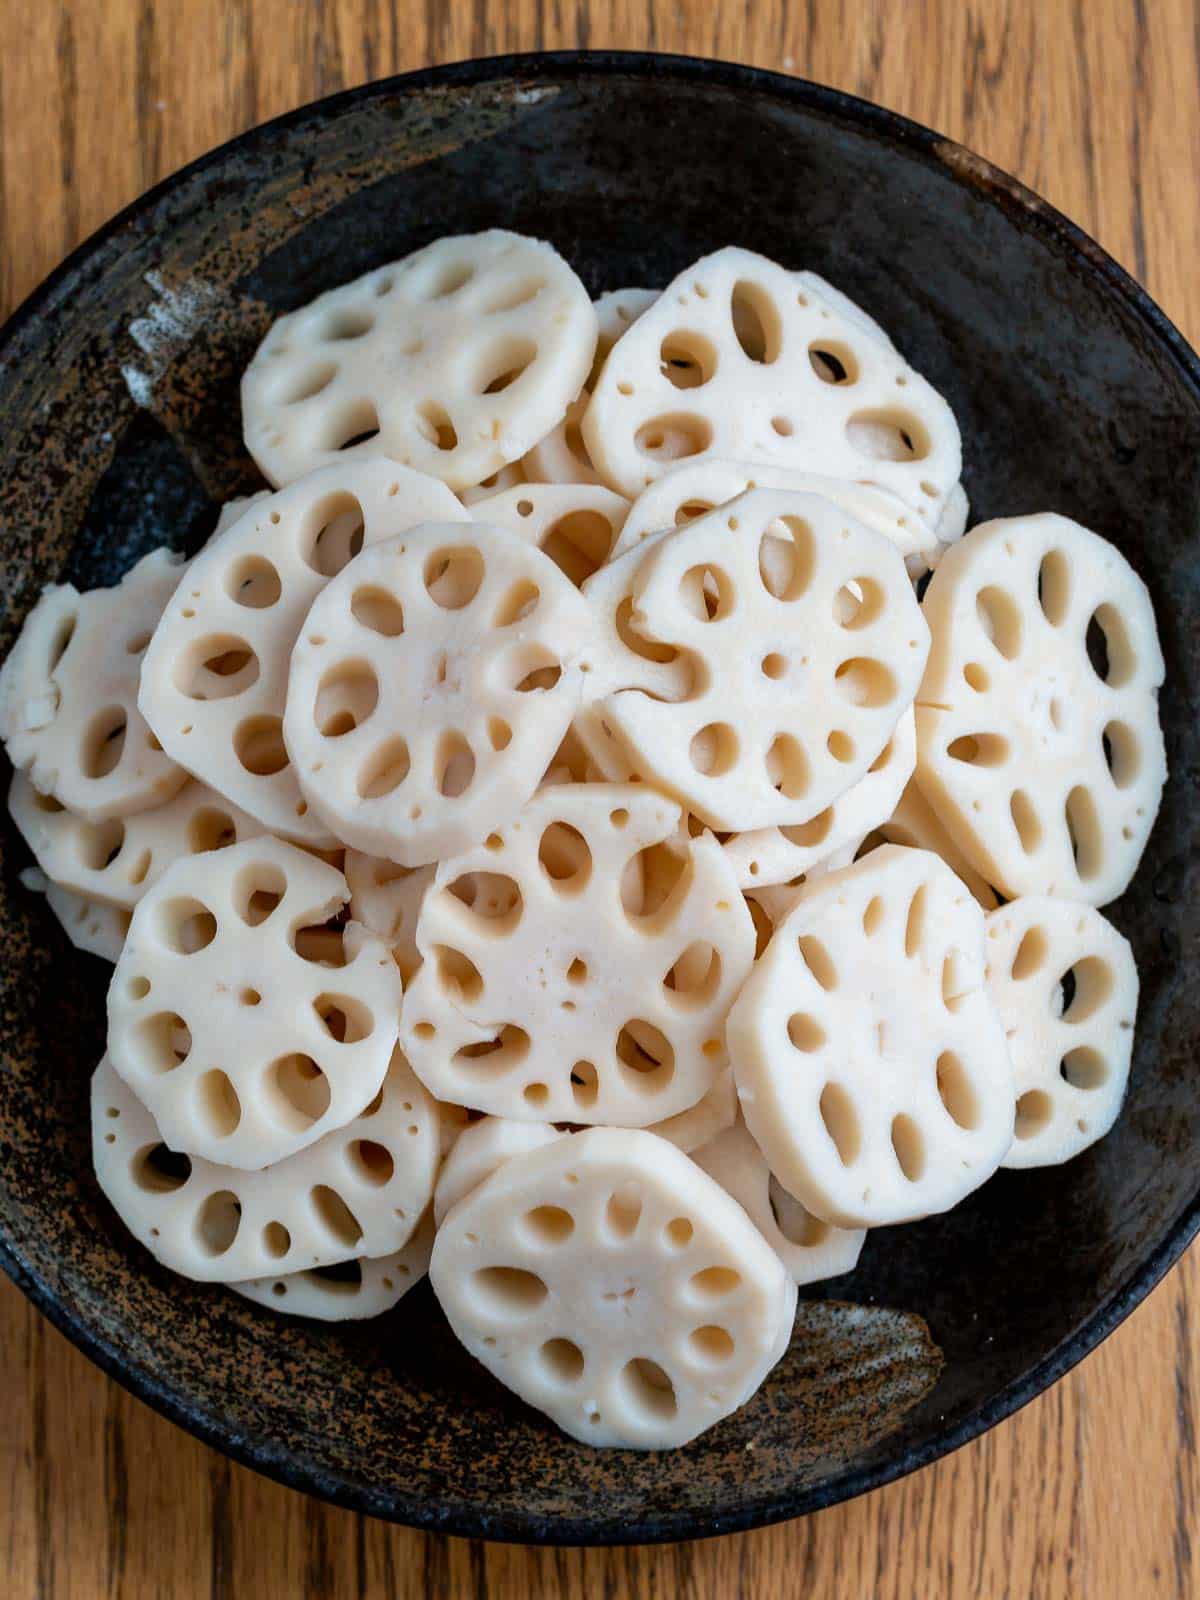 Raw lotus root with 9 holes peeled and sliced on black plate.